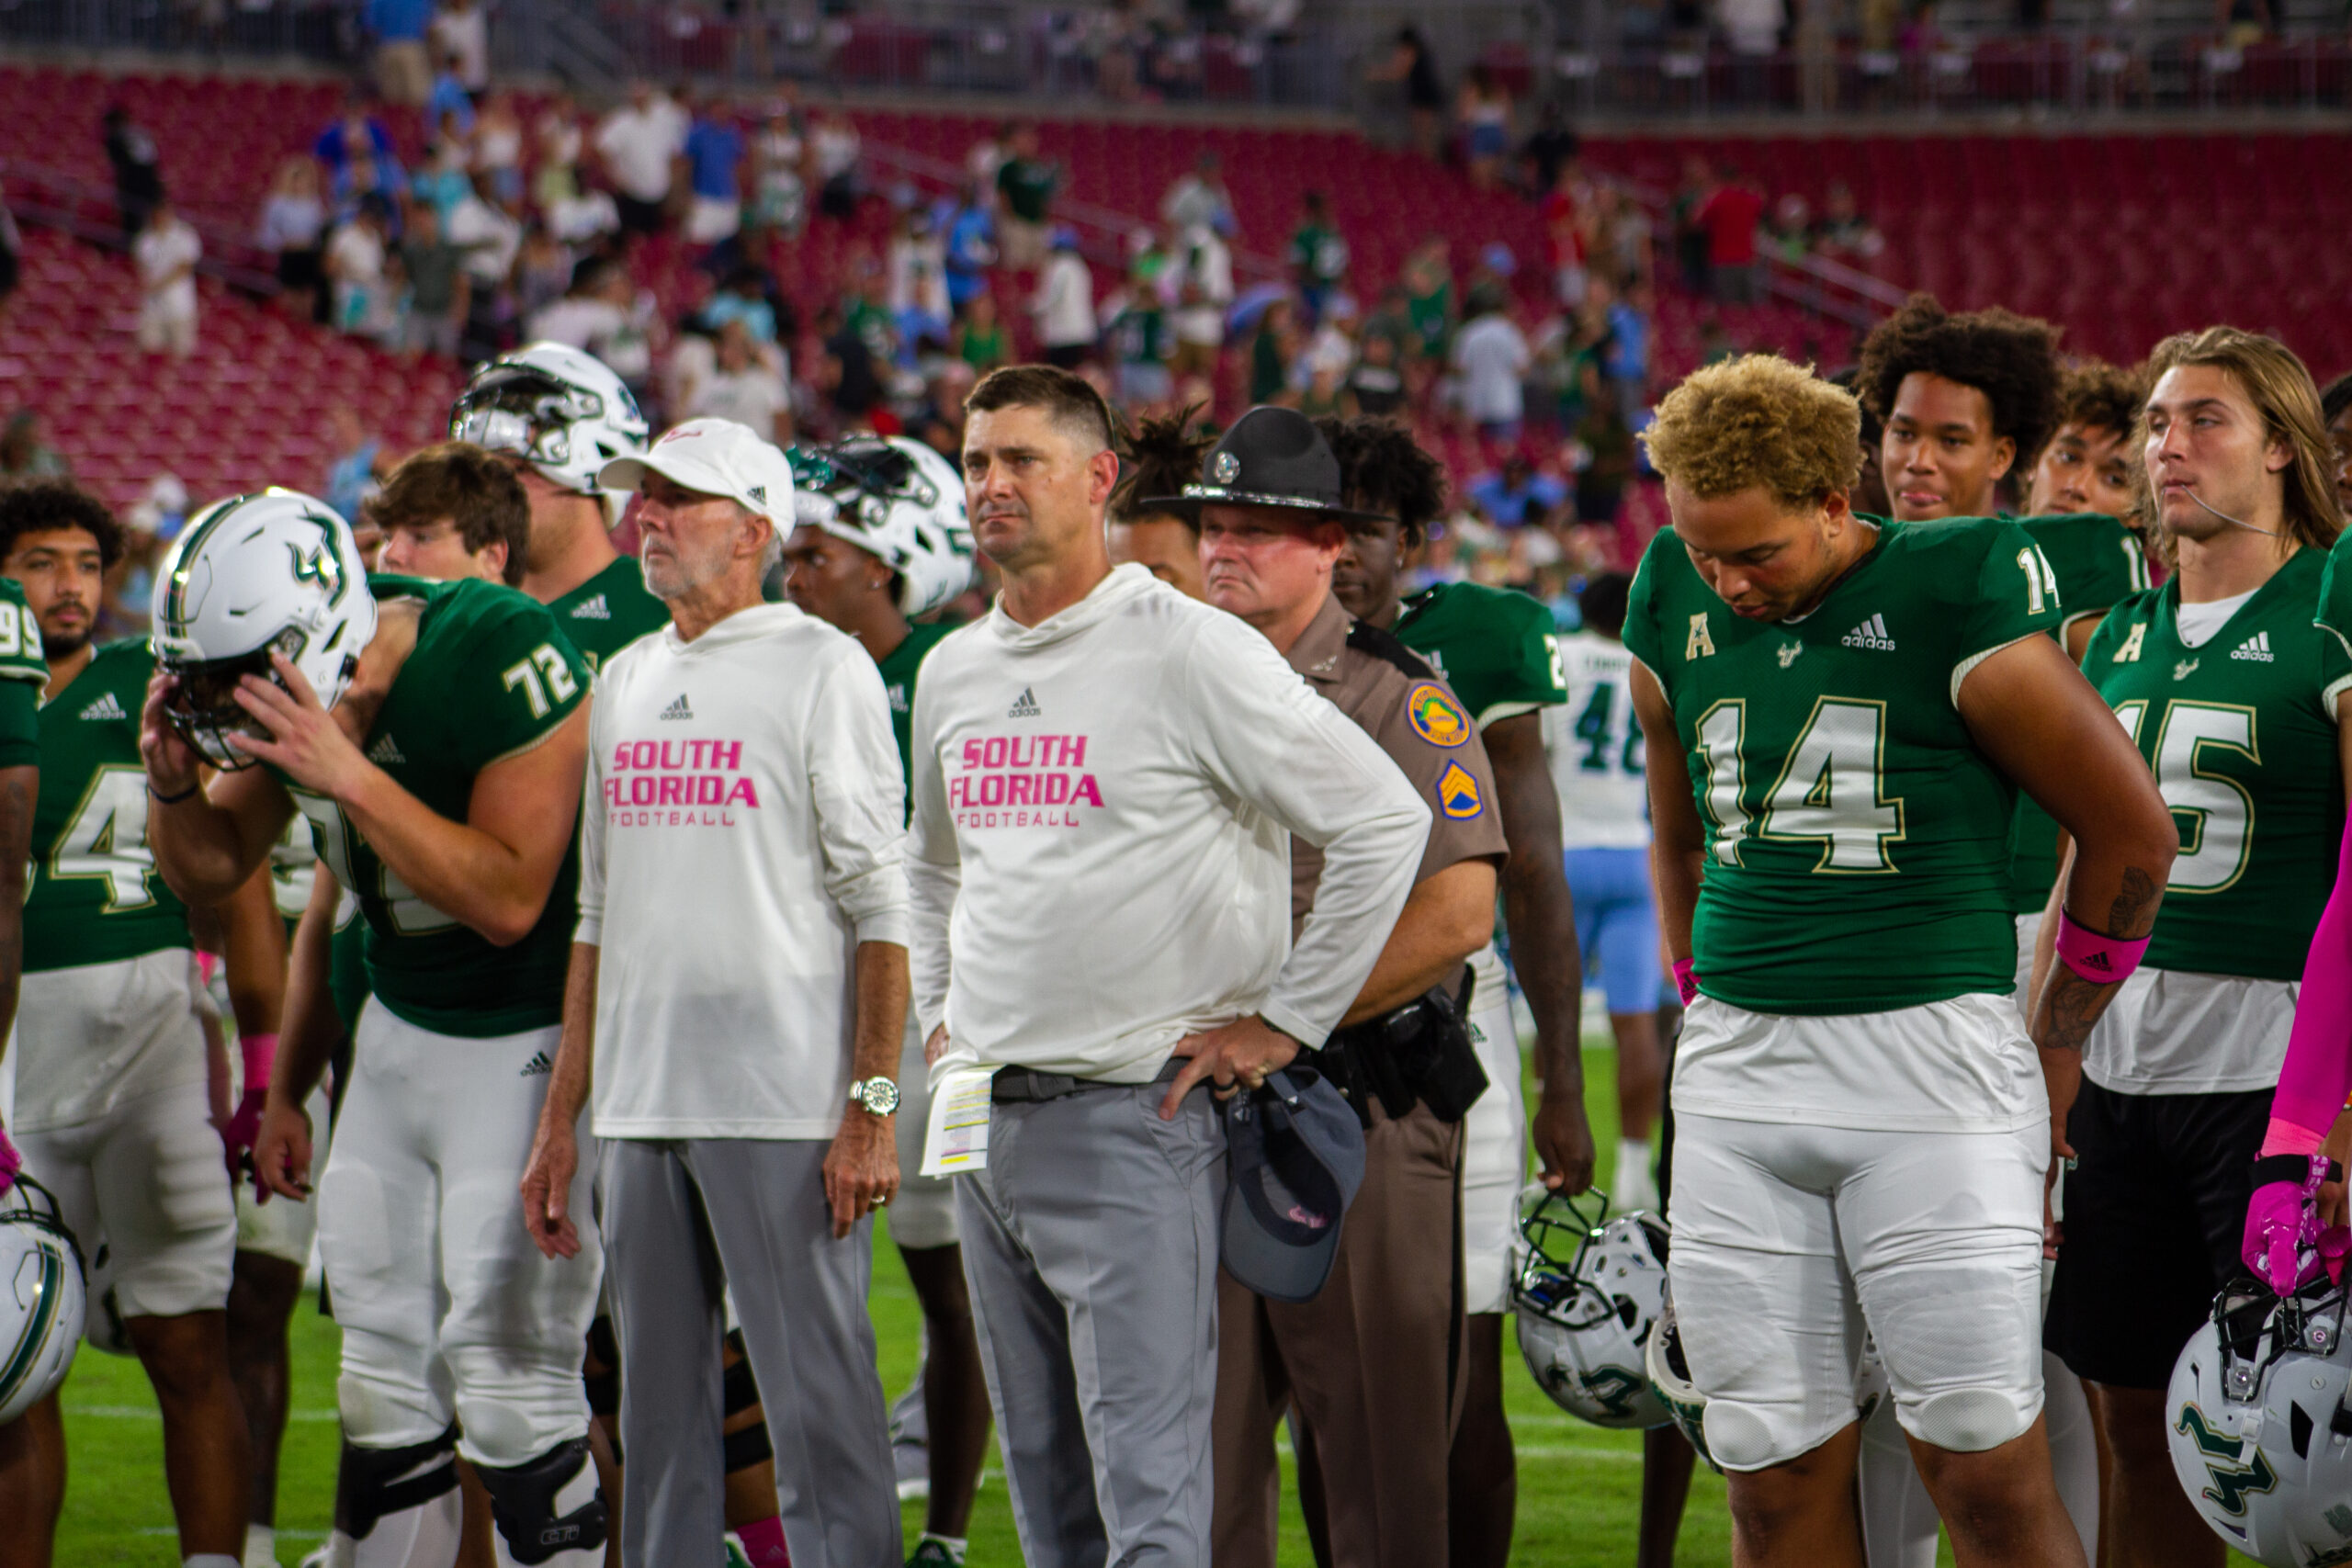 USF's promising start foiled by Bohanon injury